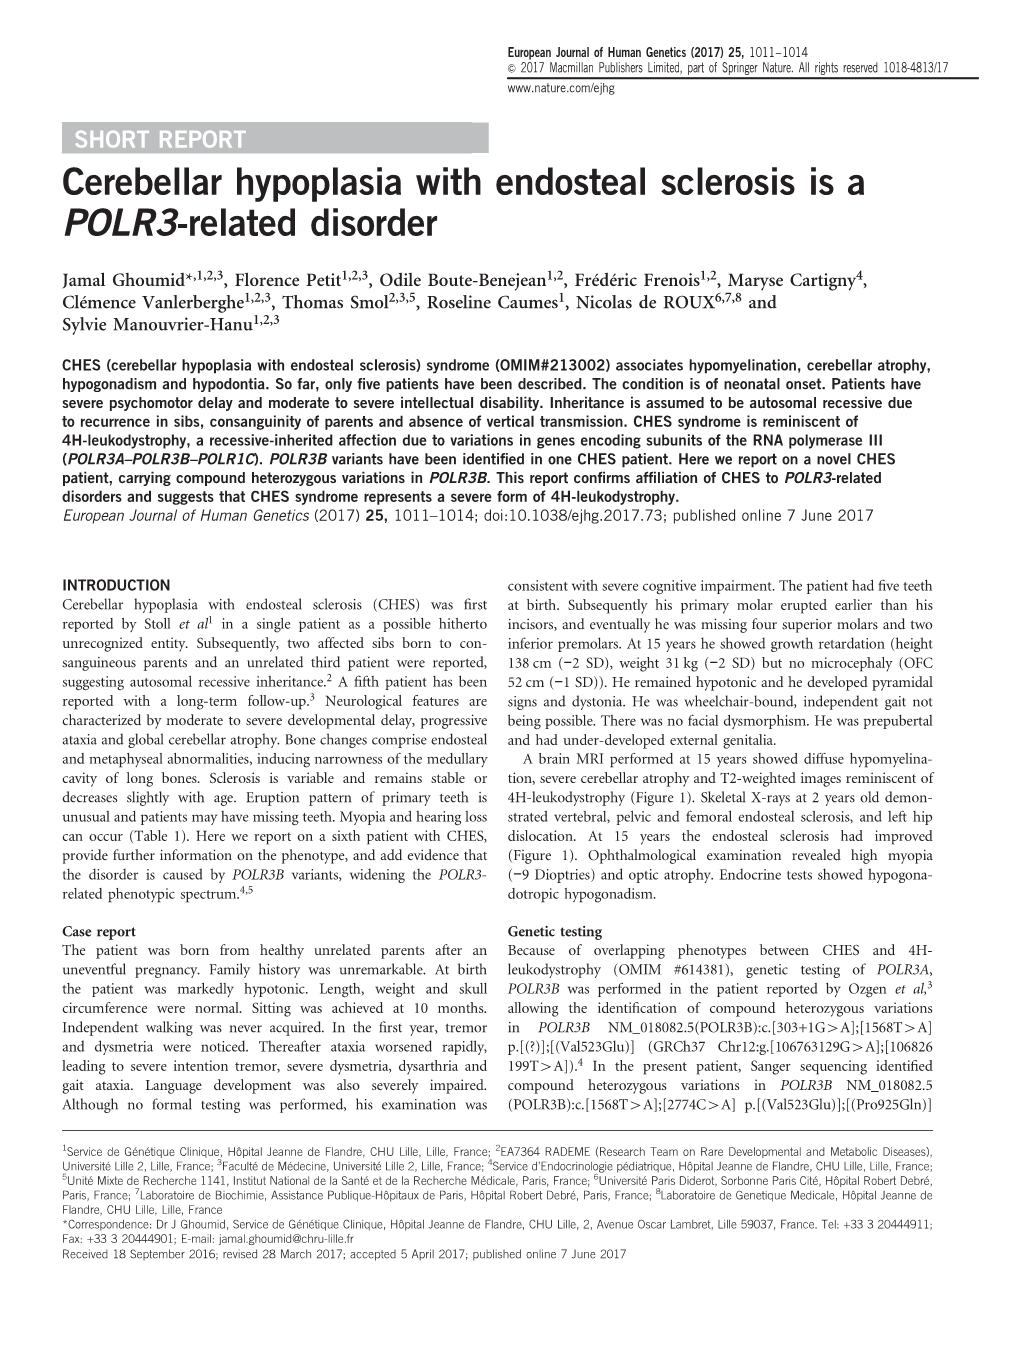 Cerebellar Hypoplasia with Endosteal Sclerosis Is a POLR3-Related Disorder